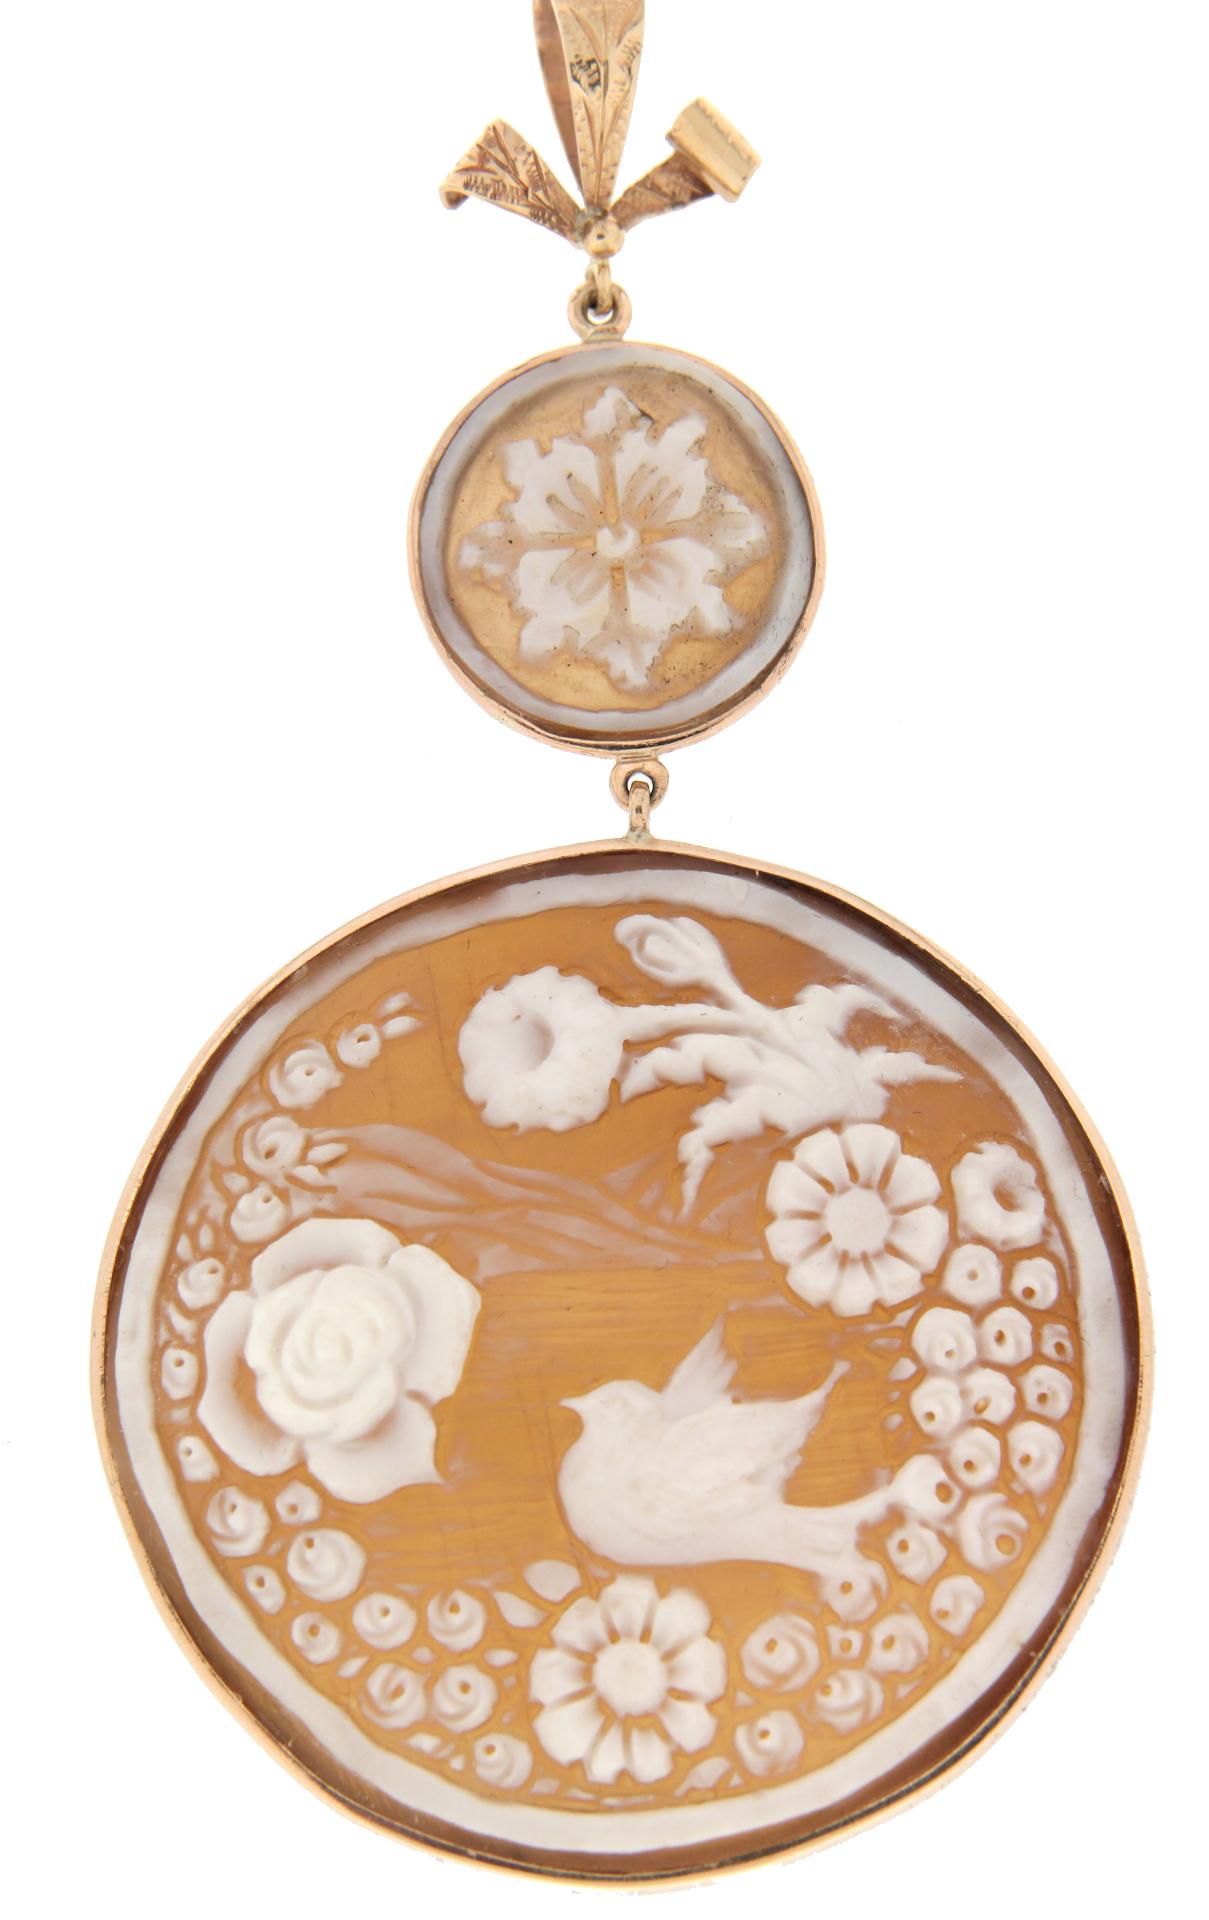 Beautiful pendant created in 9 karat yellow gold with two antique cameo pieces. Pendant created entirely by hand.

Pendant total weight 15.60 grams
(the price is without chain)